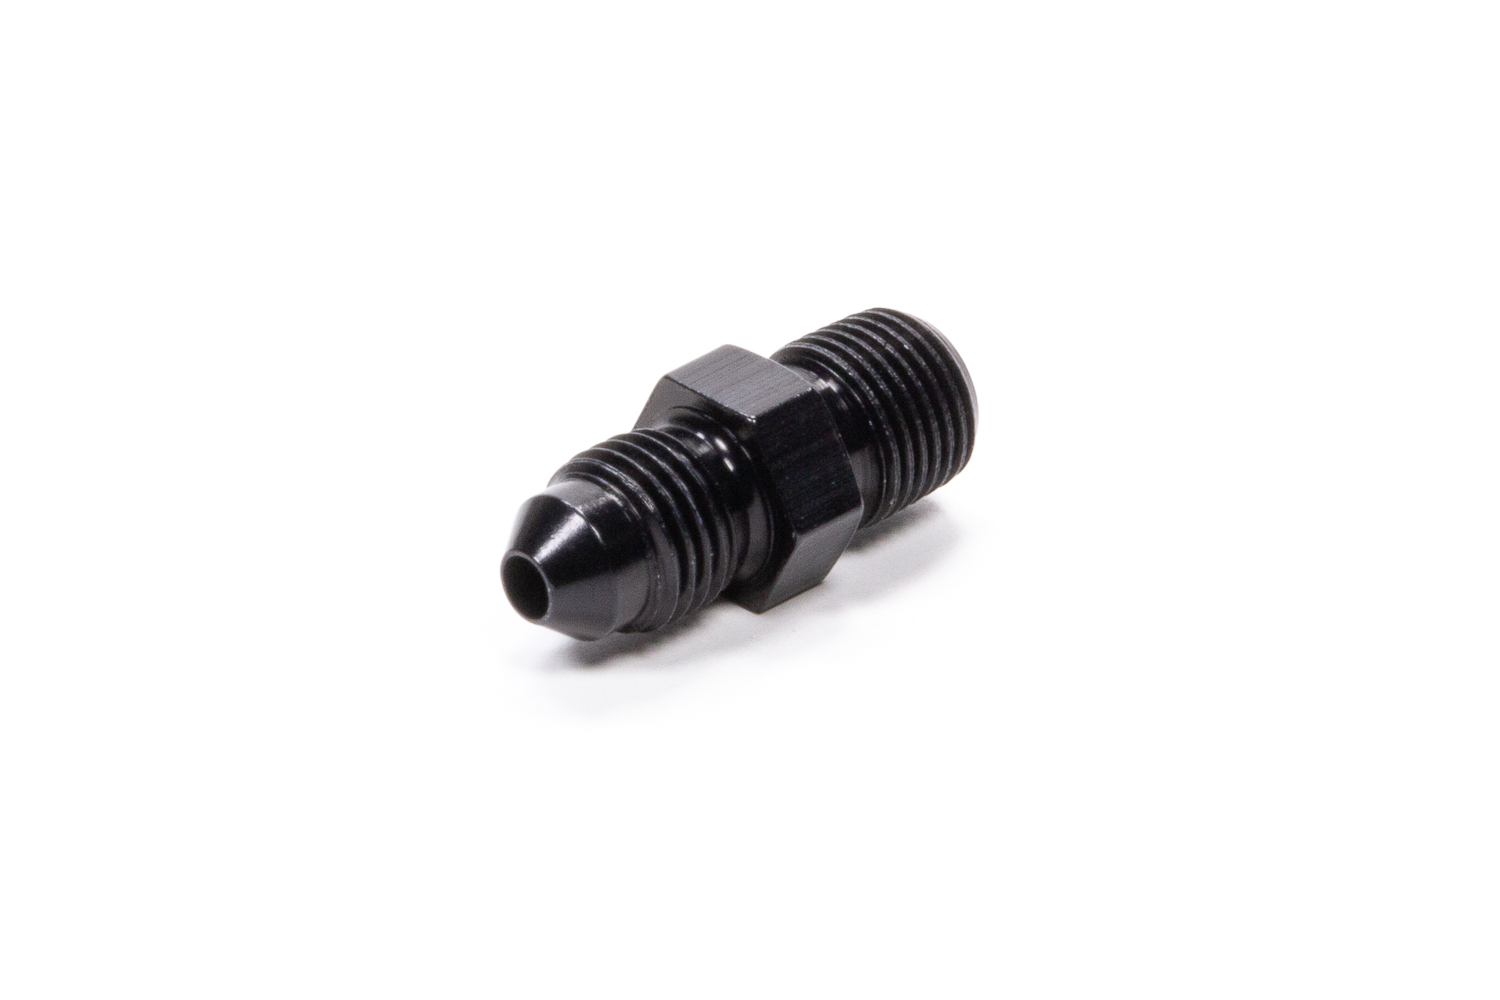 Fragola 481604-BL Fitting, Adapter, Straight, 4 AN Male to 1/8 in NPT Male, Aluminum, Black Anodized, Each